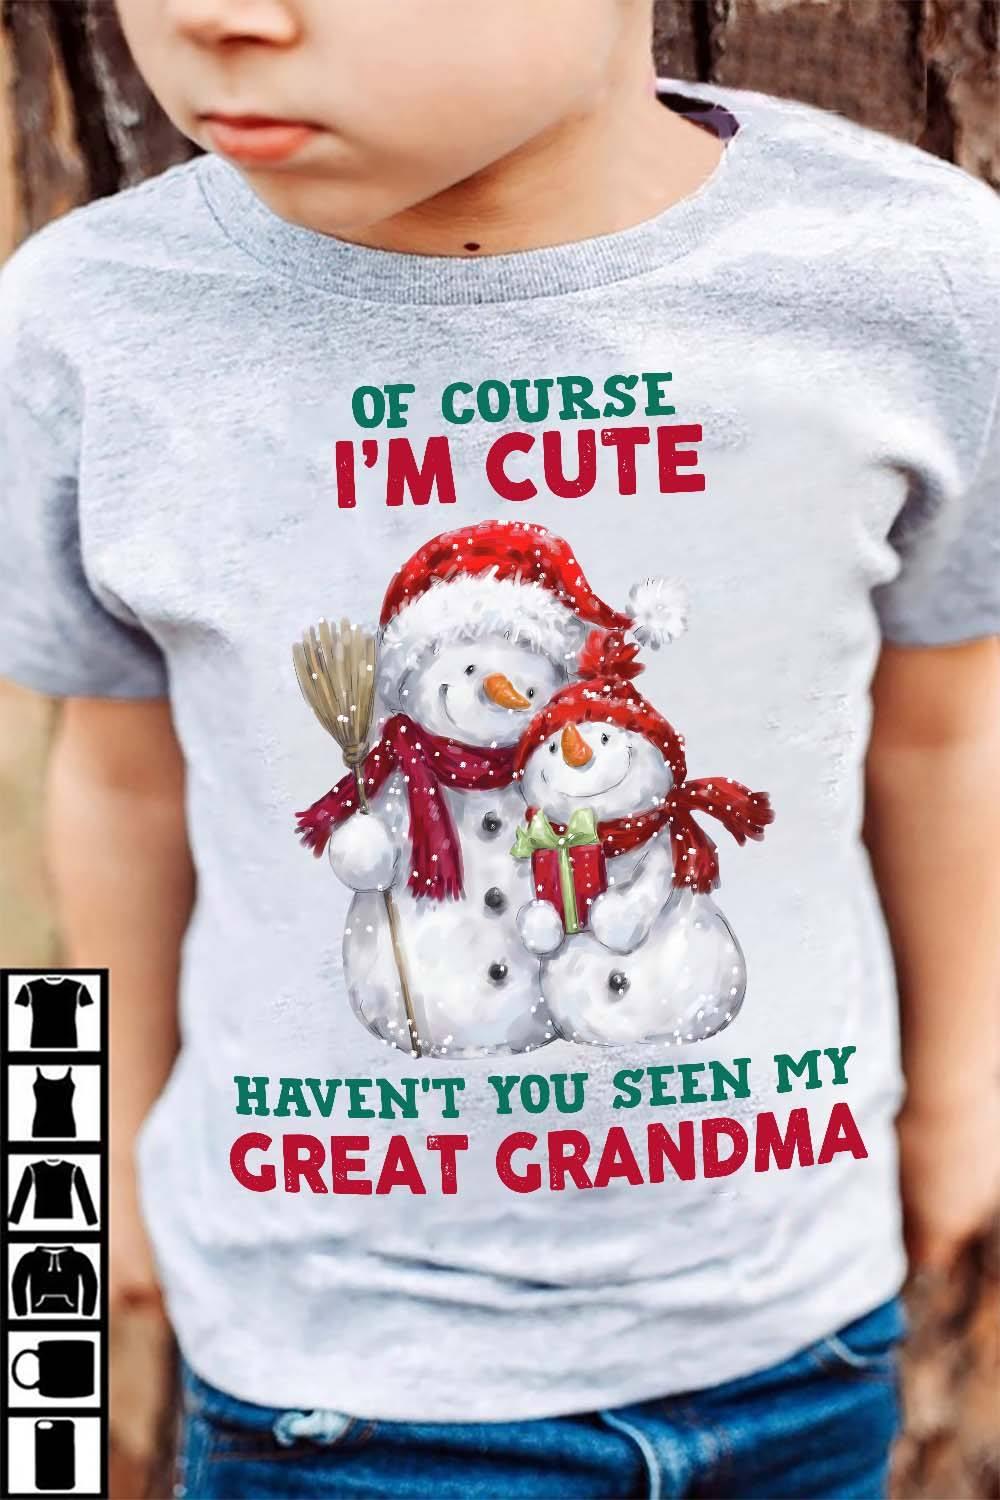 Of course I'm cute haven't you seen my great grandma - Snowman family, Christmas day snowman